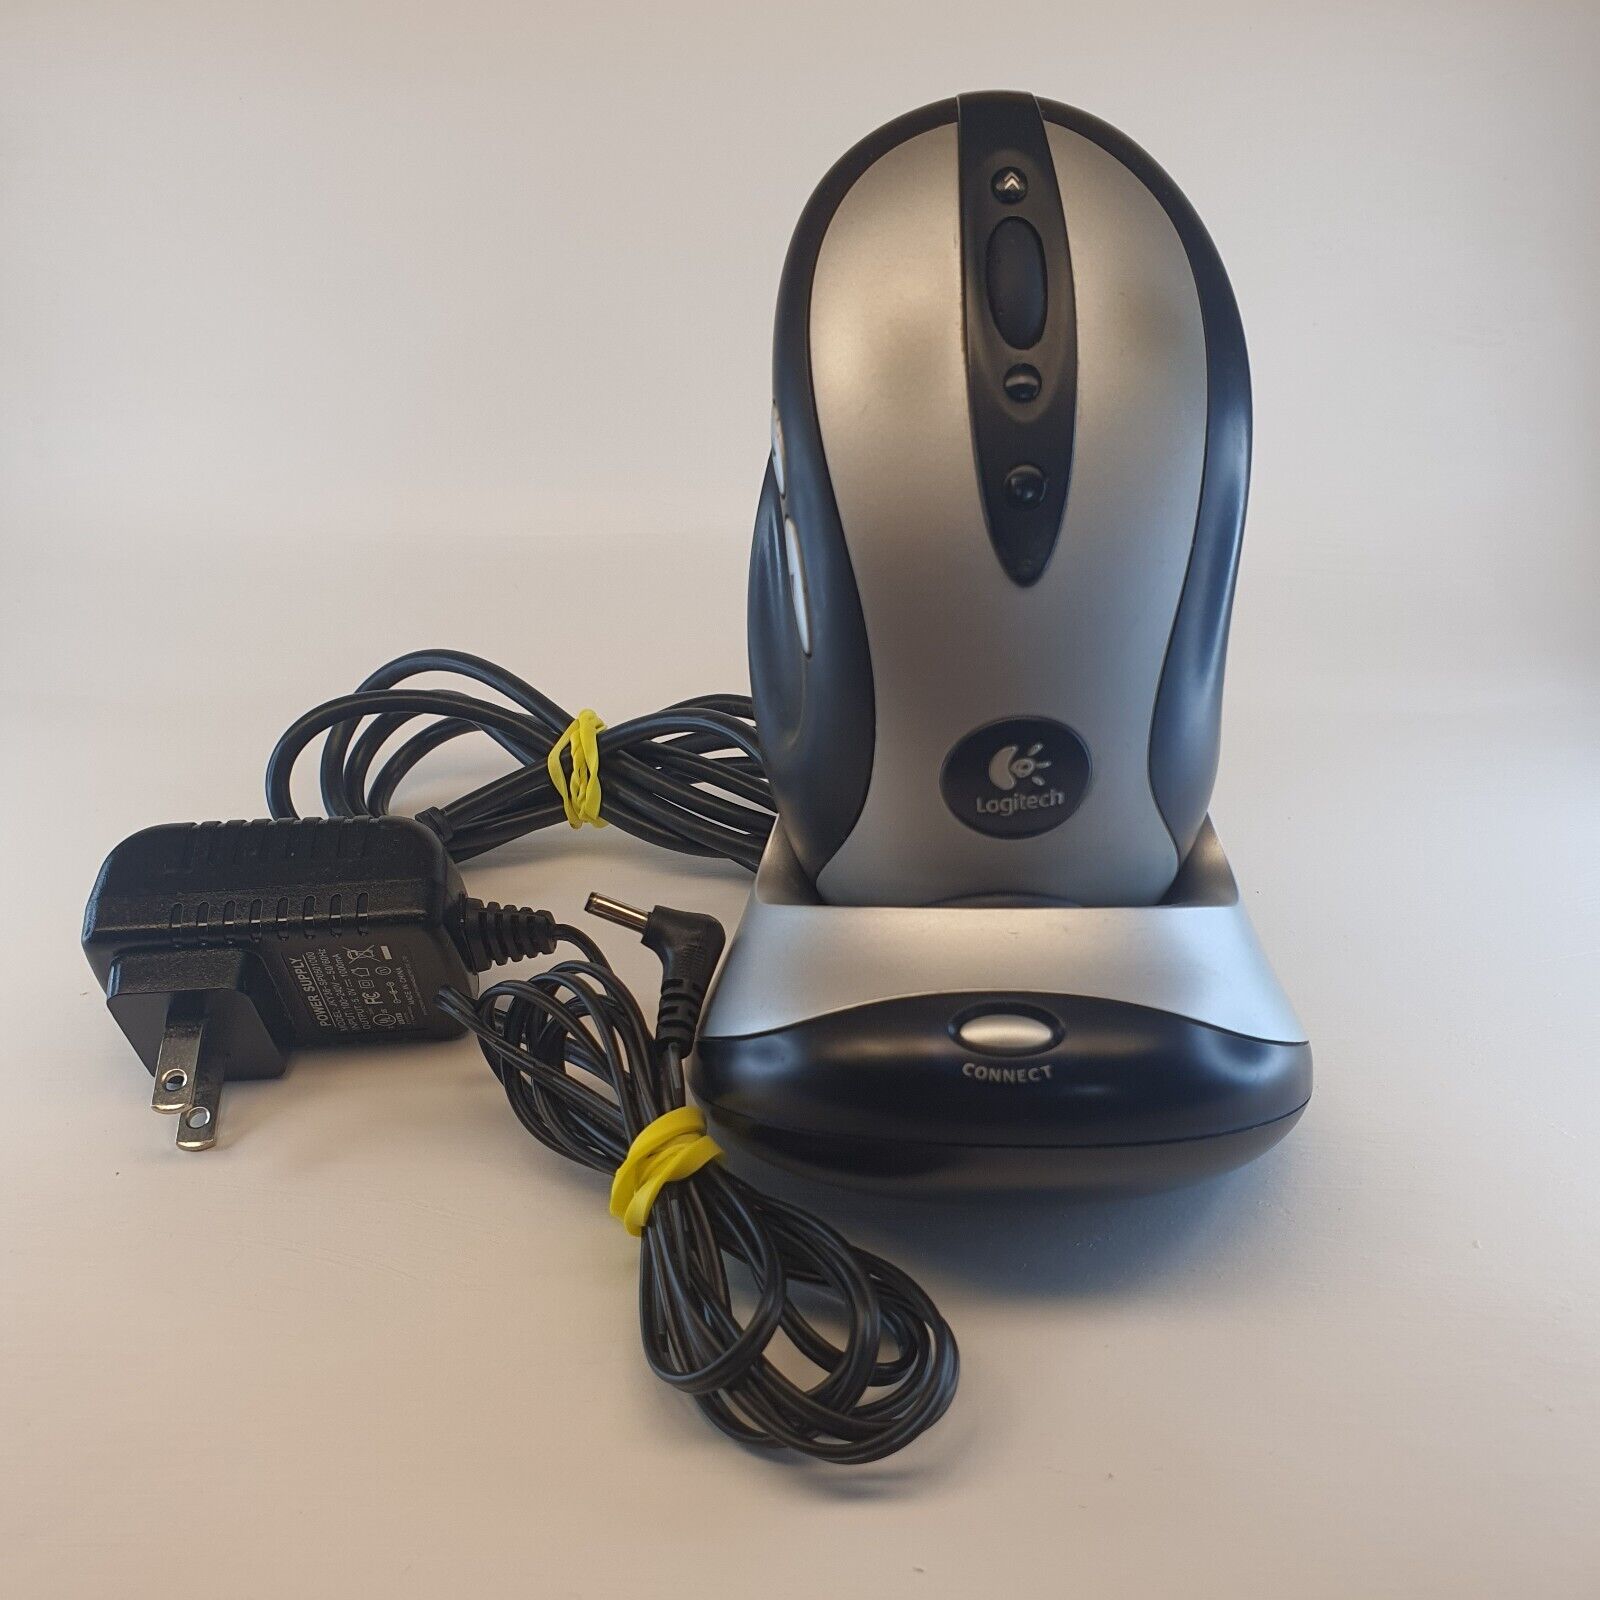 Vintage Logitech MX700 Cordless Optical Mouse with Docking Station Tested